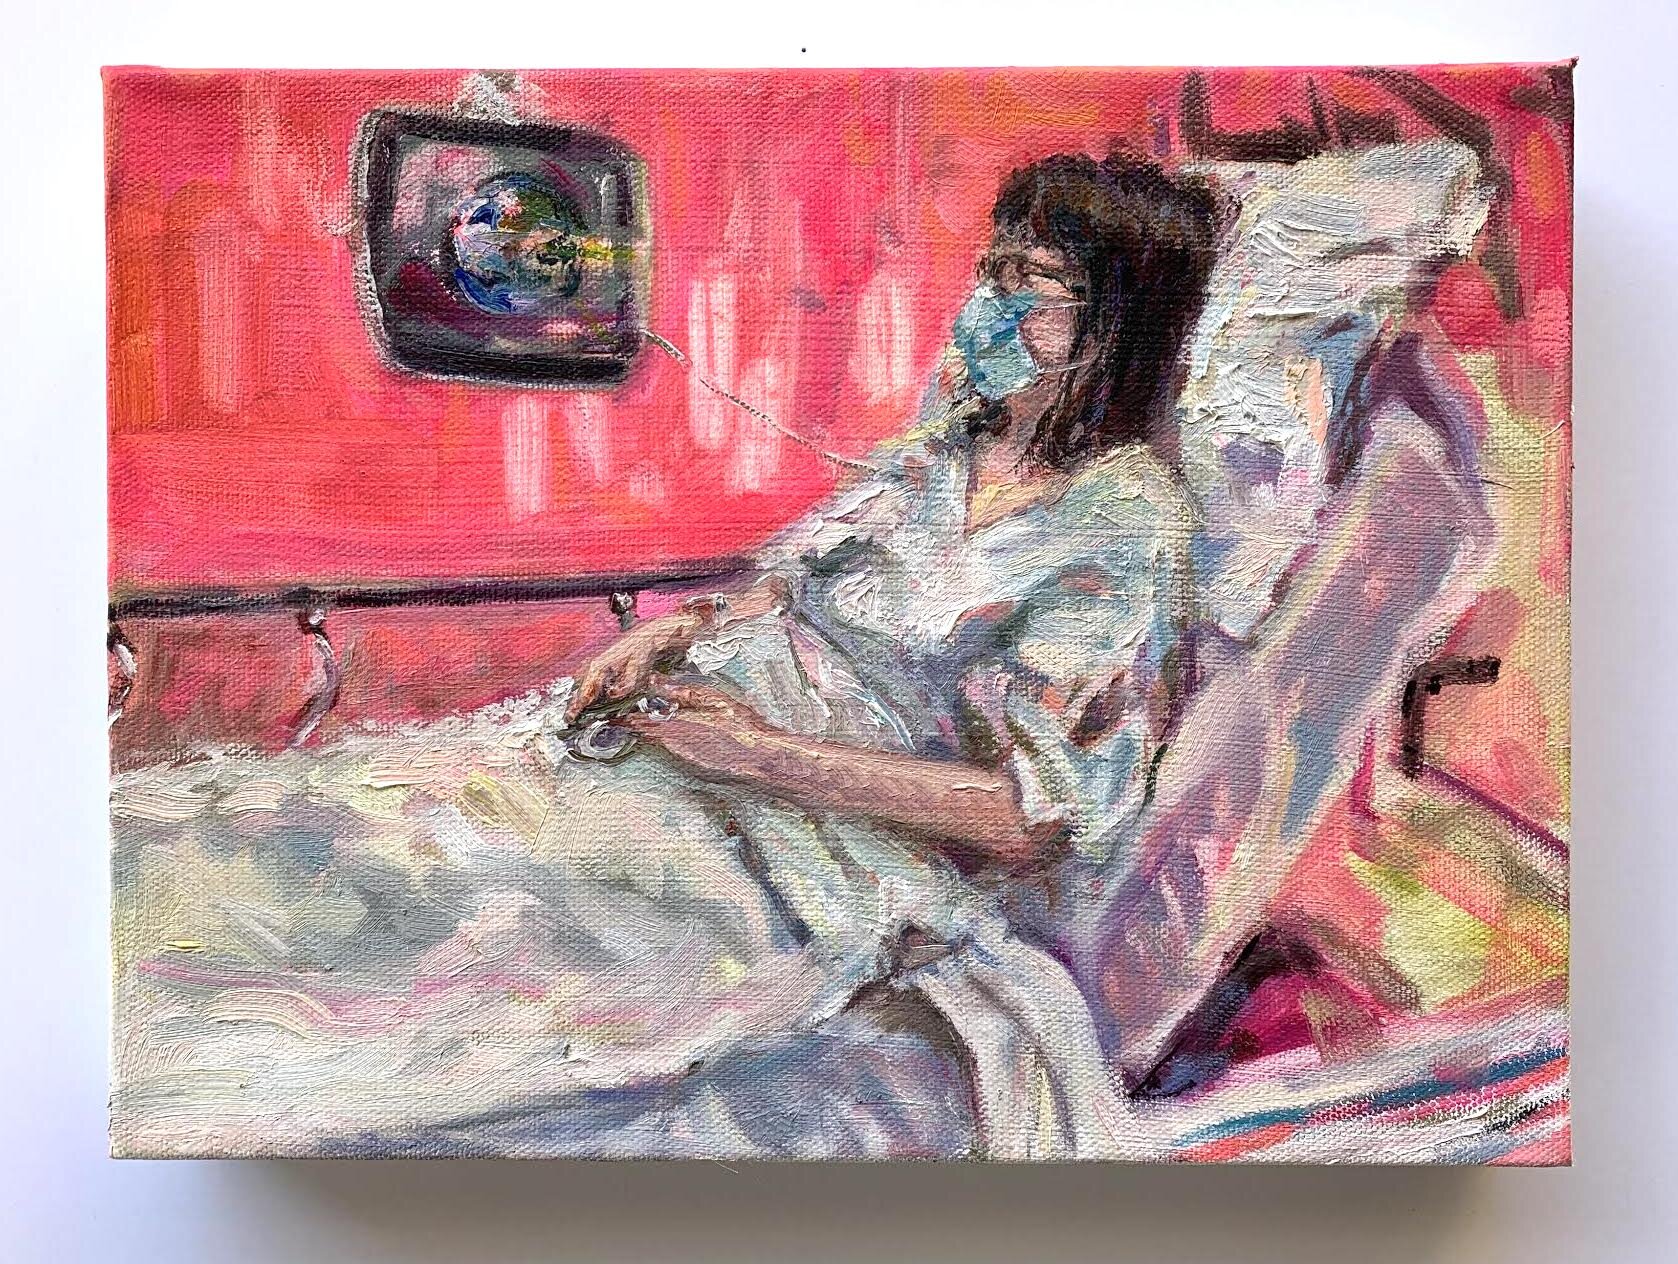  Here Again, 2020  Oil on canvas  9 X 12 inches   